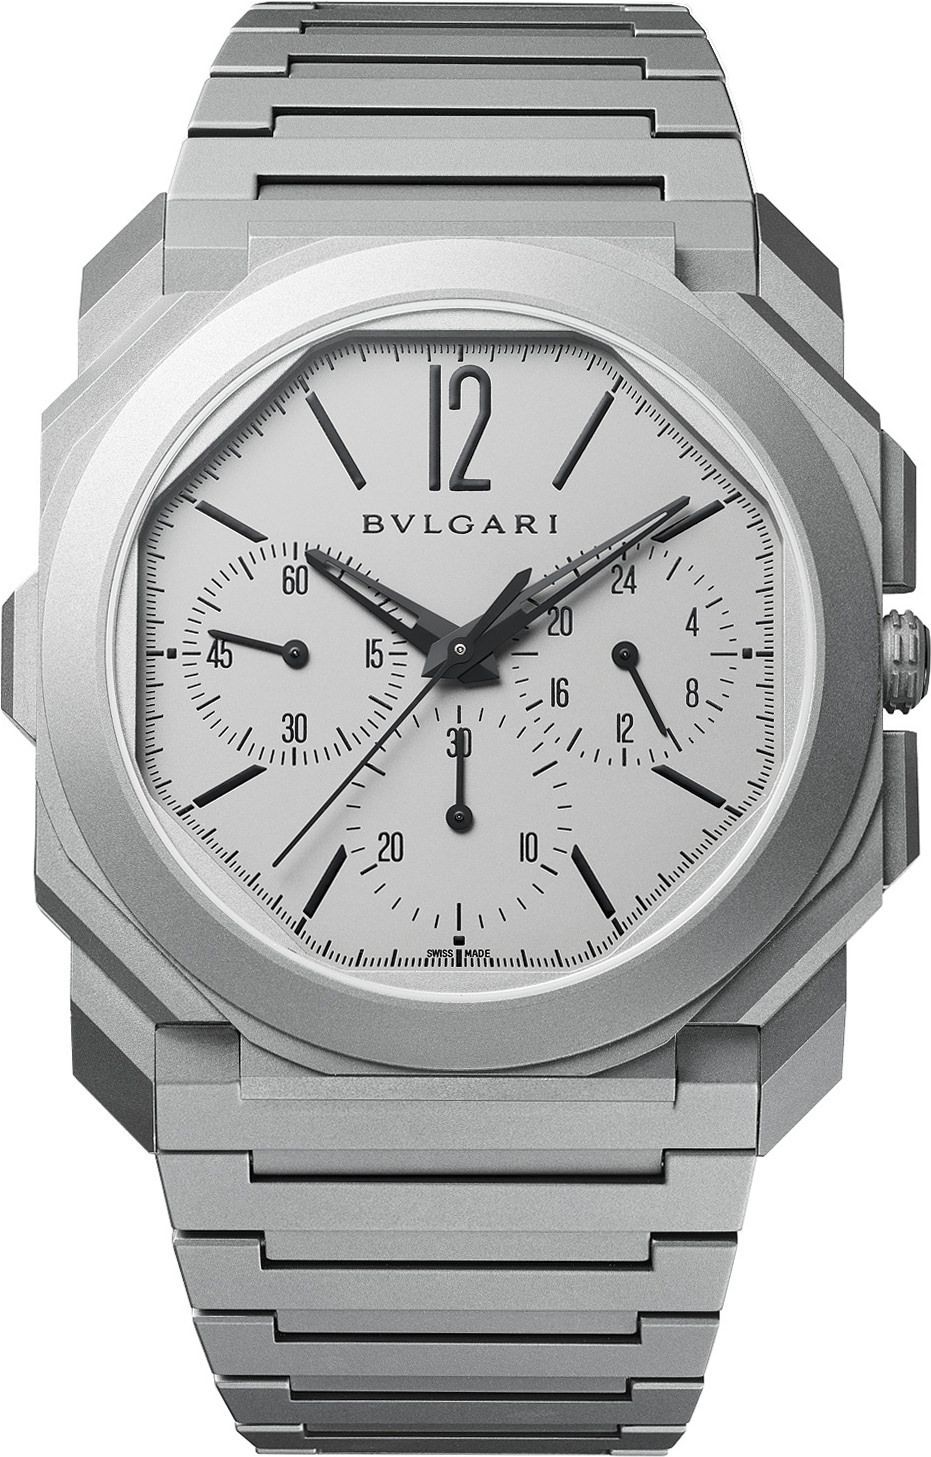 BVLGARI Octo Finissimo Silver Dial 42 mm Automatic Watch For Men - 1